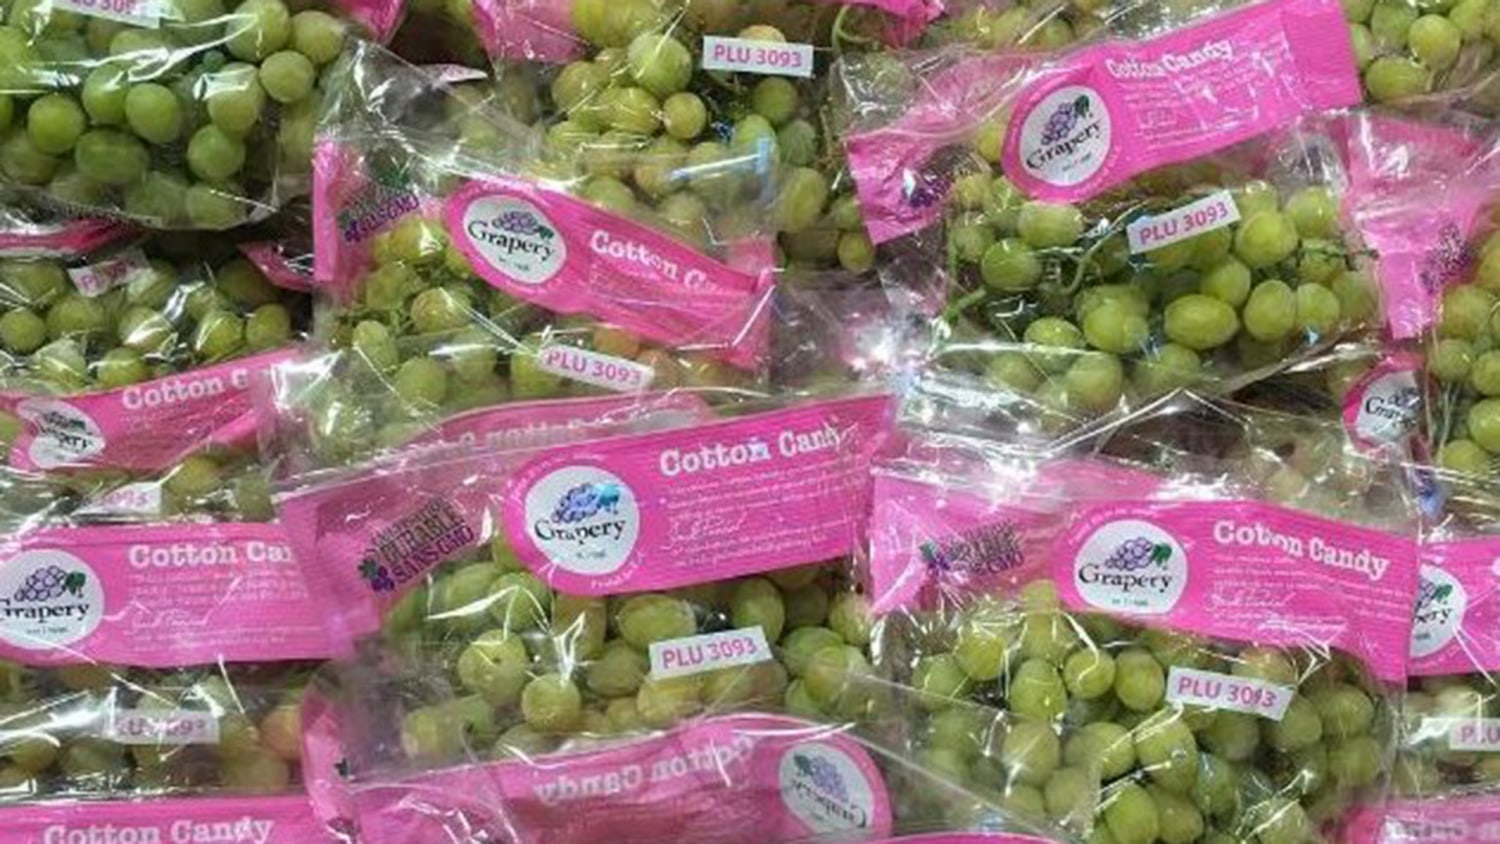 https://media-cldnry.s-nbcnews.com/image/upload/t_fit-1500w,f_auto,q_auto:best/newscms/2018_25/1347306/cotton-candy-grapes-today-180620-tease.jpg